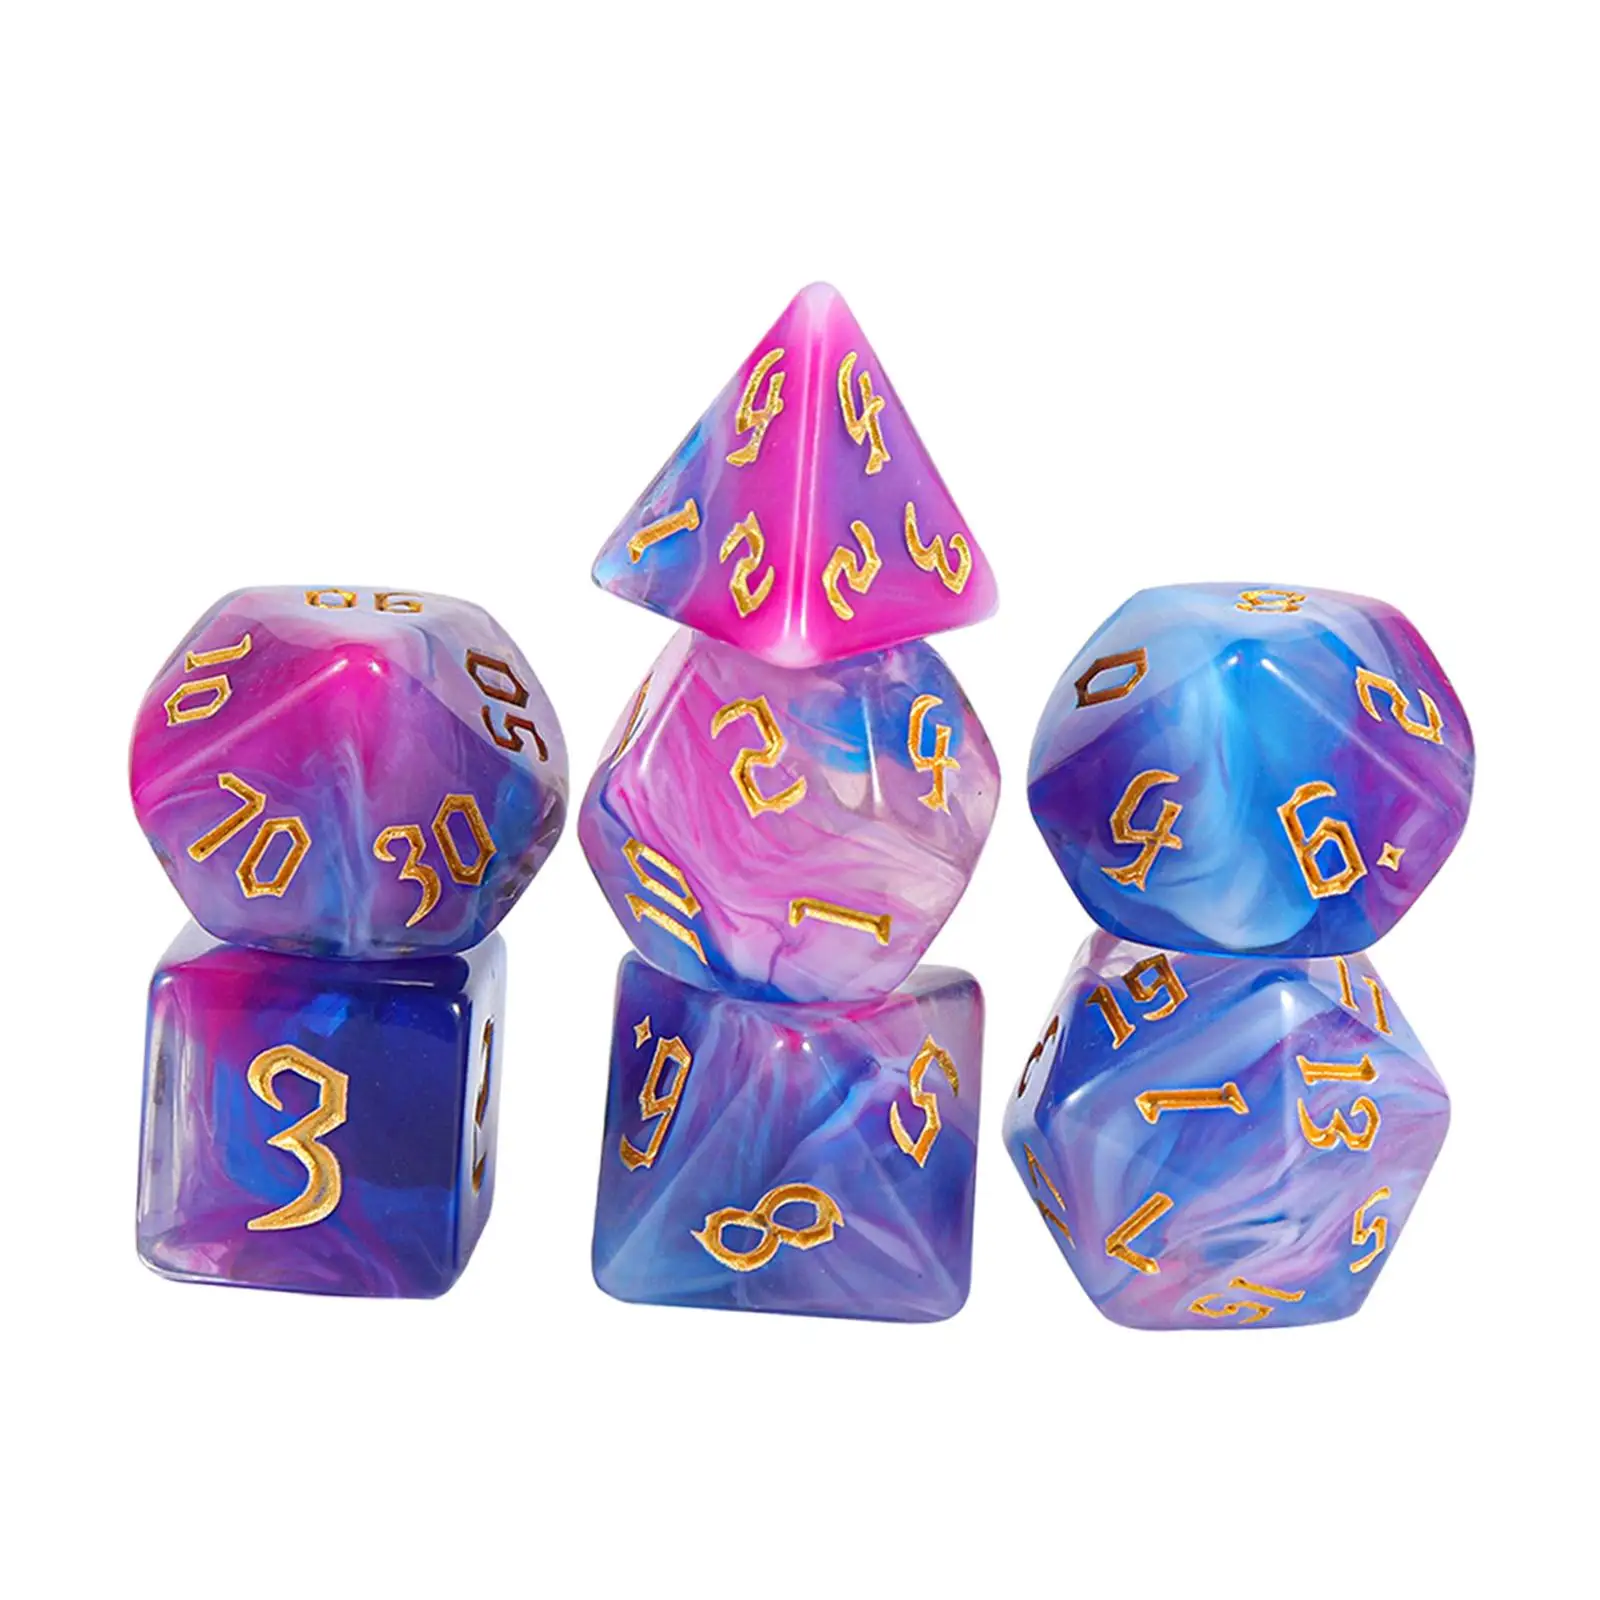 7 Pieces Acrylic Dices Table Games Party Toys D4-d20 Dices Polyhedral Dices Set for Card Games Role Playing RPG Math Teaching